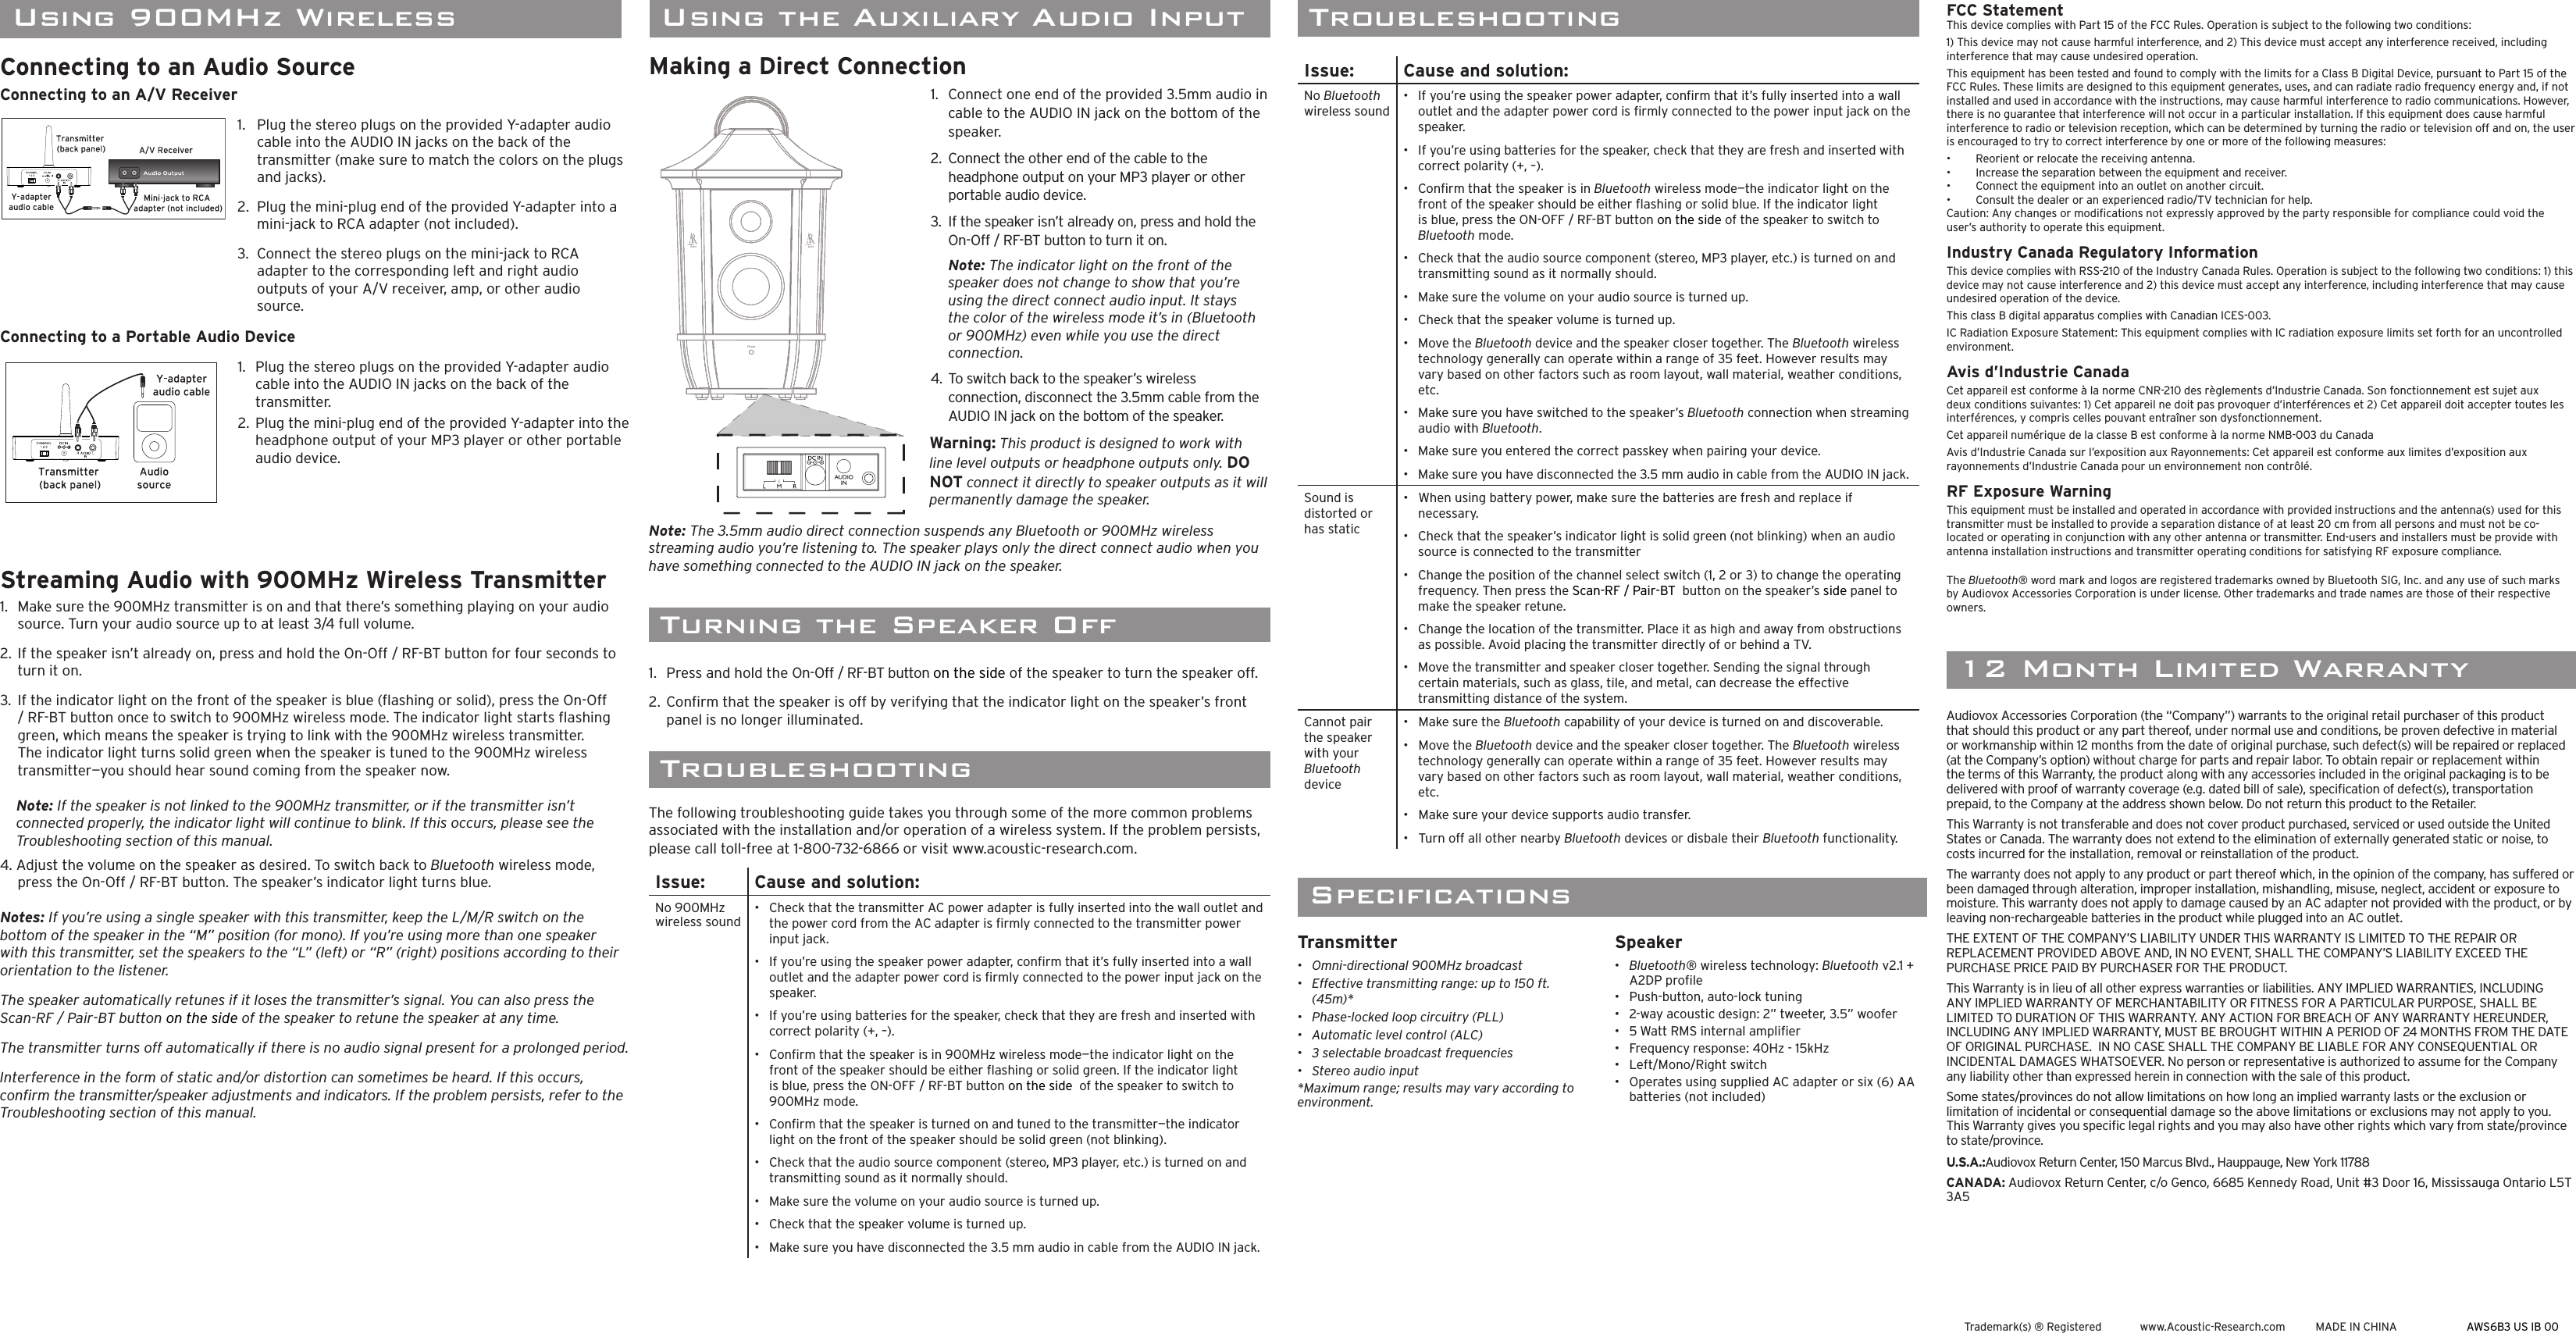 TroubleshootingTroubleshootingThe following troubleshooting guide takes you through some of the more common problems associated with the installation and/or operation of a wireless system. If the problem persists, please call toll-free at 1-800-732-6866 or visit www.acoustic-research.com.Issue: Cause and solution:No 900MHz wireless sound•   Check that the transmitter AC power adapter is fully inserted into the wall outlet and the power cord from the AC adapter is ﬁ rmly connected to the transmitter power input jack.•   If you’re using the speaker power adapter, conﬁ rm that it’s fully inserted into a wall outlet and the adapter power cord is ﬁ rmly connected to the power input jack on the speaker.•   If you’re using batteries for the speaker, check that they are fresh and inserted with correct polarity (+, –).•   Conﬁ rm that the speaker is in 900MHz wireless mode—the indicator light on the front of the speaker should be either ﬂ ashing or solid green. If the indicator light is blue, press the ON-OFF / RF-BT button on the side  of the speaker to switch to 900MHz mode.•   Conﬁ rm that the speaker is turned on and tuned to the transmitter—the indicator light on the front of the speaker should be solid green (not blinking).•   Check that the audio source component (stereo, MP3 player, etc.) is turned on and transmitting sound as it normally should.•   Make sure the volume on your audio source is turned up.•   Check that the speaker volume is turned up.•   Make sure you have disconnected the 3.5 mm audio in cable from the AUDIO IN jack. Trademark(s) ® Registered  www.Acoustic-Research.com  MADE IN CHINA AWS6B3 US IB 0012 Month Limited WarrantySpeciﬁ cationsTransmitter•   Omni-directional 900MHz broadcast•   Effective transmitting range: up to 150 ft. (45m)*•   Phase-locked loop circuitry (PLL)•   Automatic level control (ALC)•   3 selectable broadcast frequencies•   Stereo audio input*Maximum range; results may vary according to environment.Speaker•  Bluetooth® wireless technology: Bluetooth v2.1 + A2DP proﬁ le•  Push-button, auto-lock tuning•   2-way acoustic design: 2” tweeter, 3.5” woofer•   5 Watt RMS internal ampliﬁ er•   Frequency response: 40Hz - 15kHz•   Left/Mono/Right switch•   Operates using supplied AC adapter or six (6) AA batteries (not included)Audiovox Accessories Corporation (the “Company”) warrants to the original retail purchaser of this product that should this product or any part thereof, under normal use and conditions, be proven defective in material or workmanship within 12 months from the date of original purchase, such defect(s) will be repaired or replaced (at the Company’s option) without charge for parts and repair labor. To obtain repair or replacement within the terms of this Warranty, the product along with any accessories included in the original packaging is to be delivered with proof of warranty coverage (e.g. dated bill of sale), speciﬁ cation of defect(s), transportation prepaid, to the Company at the address shown below. Do not return this product to the Retailer.This Warranty is not transferable and does not cover product purchased, serviced or used outside the United States or Canada. The warranty does not extend to the elimination of externally generated static or noise, to costs incurred for the installation, removal or reinstallation of the product. The warranty does not apply to any product or part thereof which, in the opinion of the company, has suffered or been damaged through alteration, improper installation, mishandling, misuse, neglect, accident or exposure to moisture. This warranty does not apply to damage caused by an AC adapter not provided with the product, or by leaving non-rechargeable batteries in the product while plugged into an AC outlet.  THE EXTENT OF THE COMPANY’S LIABILITY UNDER THIS WARRANTY IS LIMITED TO THE REPAIR OR REPLACEMENT PROVIDED ABOVE AND, IN NO EVENT, SHALL THE COMPANY’S LIABILITY EXCEED THE PURCHASE PRICE PAID BY PURCHASER FOR THE PRODUCT.This Warranty is in lieu of all other express warranties or liabilities. ANY IMPLIED WARRANTIES, INCLUDING ANY IMPLIED WARRANTY OF MERCHANTABILITY OR FITNESS FOR A PARTICULAR PURPOSE, SHALL BE LIMITED TO DURATION OF THIS WARRANTY. ANY ACTION FOR BREACH OF ANY WARRANTY HEREUNDER, INCLUDING ANY IMPLIED WARRANTY, MUST BE BROUGHT WITHIN A PERIOD OF 24 MONTHS FROM THE DATE OF ORIGINAL PURCHASE.  IN NO CASE SHALL THE COMPANY BE LIABLE FOR ANY CONSEQUENTIAL OR INCIDENTAL DAMAGES WHATSOEVER. No person or representative is authorized to assume for the Company any liability other than expressed herein in connection with the sale of this product.Some states/provinces do not allow limitations on how long an implied warranty lasts or the exclusion or limitation of incidental or consequential damage so the above limitations or exclusions may not apply to you. This Warranty gives you speciﬁ c legal rights and you may also have other rights which vary from state/province to state/province.U.S.A.:Audiovox Return Center, 150 Marcus Blvd., Hauppauge, New York 11788CANADA: Audiovox Return Center, c/o Genco, 6685 Kennedy Road, Unit #3 Door 16, Mississauga Ontario L5T 3A5 Turning the Speaker Off1.  Press and hold the On-Off / RF-BT button on the side of the speaker to turn the speaker off. 2. Conﬁ rm that the speaker is off by verifying that the indicator light on the speaker’s front panel is no longer illuminated.FCC StatementThis device complies with Part 15 of the FCC Rules. Operation is subject to the following two conditions: 1) This device may not cause harmful interference, and 2) This device must accept any interference received, including interference that may cause undesired operation. This equipment has been tested and found to comply with the limits for a Class B Digital Device, pursuant to Part 15 of the FCC Rules. These limits are designed to this equipment generates, uses, and can radiate radio frequency energy and, if not installed and used in accordance with the instructions, may cause harmful interference to radio communications. However, there is no guarantee that interference will not occur in a particular installation. If this equipment does cause harmful interference to radio or television reception, which can be determined by turning the radio or television off and on, the user is encouraged to try to correct interference by one or more of the following measures: •   Reorient or relocate the receiving antenna. •   Increase the separation between the equipment and receiver. •   Connect the equipment into an outlet on another circuit. •   Consult the dealer or an experienced radio/TV technician for help. Caution: Any changes or modiﬁ cations not expressly approved by the party responsible for compliance could void the user’s authority to operate this equipment. Industry Canada Regulatory InformationThis device complies with RSS-210 of the Industry Canada Rules. Operation is subject to the following two conditions: 1) this device may not cause interference and 2) this device must accept any interference, including interference that may cause undesired operation of the device. This class B digital apparatus complies with Canadian ICES-003.IC Radiation Exposure Statement: This equipment complies with IC radiation exposure limits set forth for an uncontrolled environment.Avis d’Industrie CanadaCet appareil est conforme à la norme CNR-210 des règlements d’Industrie Canada. Son fonctionnement est sujet aux deux conditions suivantes: 1) Cet appareil ne doit pas provoquer d’interférences et 2) Cet appareil doit accepter toutes les interférences, y compris celles pouvant entraîner son dysfonctionnement. Cet appareil numérique de la classe B est conforme à la norme NMB-003 du Canada Avis d’Industrie Canada sur l’exposition aux Rayonnements: Cet appareil est conforme aux limites d’exposition aux rayonnements d’Industrie Canada pour un environnement non contrôlé.RF Exposure WarningThis equipment must be installed and operated in accordance with provided instructions and the antenna(s) used for this transmitter must be installed to provide a separation distance of at least 20 cm from all persons and must not be co-located or operating in conjunction with any other antenna or transmitter. End-users and installers must be provide with antenna installation instructions and transmitter operating conditions for satisfying RF exposure compliance.The Bluetooth® word mark and logos are registered trademarks owned by Bluetooth SIG, Inc. and any use of such marks by Audiovox Accessories Corporation is under license. Other trademarks and trade names are those of their respective owners.Making a Direct Connection1.  Connect one end of the provided 3.5mm audio in cable to the AUDIO IN jack on the bottom of the speaker.2.  Connect the other end of the cable to the headphone output on your MP3 player or other portable audio device.3.  If the speaker isn’t already on, press and hold the On-Off / RF-BT button to turn it on. Note: The indicator light on the front of the speaker does not change to show that you’re using the direct connect audio input. It stays the color of the wireless mode it’s in (Bluetooth or 900MHz) even while you use the direct connection. 4.  To switch back to the speaker’s wireless connection, disconnect the 3.5mm cable from the AUDIO IN jack on the bottom of the speaker.Warning: This product is designed to work with line level outputs or headphone outputs only. DO NOT connect it directly to speaker outputs as it will permanently damage the speaker.Note: The 3.5mm audio direct connection suspends any Bluetooth or 900MHz wireless streaming audio you’re listening to. The speaker plays only the direct connect audio when you have something connected to the AUDIO IN jack on the speaker. Using the Auxiliary Audio InputPow e rPowerLMRDCINConnecting to an Audio SourceConnecting to an A/V Receiver1.   Plug the stereo plugs on the provided Y-adapter audio cable into the AUDIO IN jacks on the back of the  transmitter (make sure to match the colors on the plugs and jacks).2.  Plug the mini-plug end of the provided Y-adapter into a mini-jack to RCA adapter (not included).3.  Connect the stereo plugs on the mini-jack to RCA adapter to the corresponding left and right audio outputs of your A/V receiver, amp, or other audio source.Connecting to a Portable Audio Device1.   Plug the stereo plugs on the provided Y-adapter audio cable into the AUDIO IN jacks on the back of the transmitter.2.  Plug the mini-plug end of the provided Y-adapter into the headphone output of your MP3 player or other portable audio device.Streaming Audio with 900MHz Wireless Transmitter1.   Make sure the 900MHz transmitter is on and that there’s something playing on your audio source. Turn your audio source up to at least 3/4 full volume.2.  If the speaker isn’t already on, press and hold the On-Off / RF-BT button for four seconds to turn it on.3.  If the indicator light on the front of the speaker is blue (ﬂ ashing or solid), press the On-Off / RF-BT button once to switch to 900MHz wireless mode. The indicator light starts ﬂ ashing green, which means the speaker is trying to link with the 900MHz wireless transmitter. The indicator light turns solid green when the speaker is tuned to the 900MHz wireless transmitter—you should hear sound coming from the speaker now.Note: If the speaker is not linked to the 900MHz transmitter, or if the transmitter isn’t connected properly, the indicator light will continue to blink. If this occurs, please see the Troubleshooting section of this manual.4. Adjust the volume on the speaker as desired. To switch back to Bluetooth wireless mode, press the On-Off / RF-BT button. The speaker’s indicator light turns blue.Notes: If you’re using a single speaker with this transmitter, keep the L/M/R switch on the bottom of the speaker in the “M” position (for mono). If you’re using more than one speaker with this transmitter, set the speakers to the “L” (left) or “R” (right) positions according to their orientation to the listener.The speaker automatically retunes if it loses the transmitter’s signal. You can also press the Scan-RF / Pair-BT button on the side of the speaker to retune the speaker at any time.The transmitter turns off automatically if there is no audio signal present for a prolonged period.Interference in the form of static and/or distortion can sometimes be heard. If this occurs, conﬁ rm the transmitter/speaker adjustments and indicators. If the problem persists, refer to the Troubleshooting section of this manual.Issue: Cause and solution:No Bluetooth wireless sound•   If you’re using the speaker power adapter, conﬁ rm that it’s fully inserted into a wall outlet and the adapter power cord is ﬁ rmly connected to the power input jack on the speaker.•   If you’re using batteries for the speaker, check that they are fresh and inserted with correct polarity (+, –).•   Conﬁ rm that the speaker is in Bluetooth wireless mode—the indicator light on the front of the speaker should be either ﬂ ashing or solid blue. If the indicator light is blue, press the ON-OFF / RF-BT button on the side of the speaker to switch to Bluetooth mode.•   Check that the audio source component (stereo, MP3 player, etc.) is turned on and transmitting sound as it normally should.•   Make sure the volume on your audio source is turned up.•   Check that the speaker volume is turned up.•   Move the Bluetooth device and the speaker closer together. The Bluetooth wireless technology generally can operate within a range of 35 feet. However results may vary based on other factors such as room layout, wall material, weather conditions, etc.•   Make sure you have switched to the speaker’s Bluetooth connection when streaming audio with Bluetooth.•   Make sure you entered the correct passkey when pairing your device.•   Make sure you have disconnected the 3.5 mm audio in cable from the AUDIO IN jack.Sound is distorted or has static•   When using battery power, make sure the batteries are fresh and replace if necessary.•   Check that the speaker’s indicator light is solid green (not blinking) when an audio source is connected to the transmitter•   Change the position of the channel select switch (1, 2 or 3) to change the operating frequency. Then press the Scan-RF / Pair-BT  button on the speaker’s side panel to make the speaker retune.•   Change the location of the transmitter. Place it as high and away from obstructions as possible. Avoid placing the transmitter directly of or behind a TV.•   Move the transmitter and speaker closer together. Sending the signal through certain materials, such as glass, tile, and metal, can decrease the effective transmitting distance of the system.Cannot pair the speaker with your Bluetooth device•   Make sure the Bluetooth capability of your device is turned on and discoverable.•   Move the Bluetooth device and the speaker closer together. The Bluetooth wireless technology generally can operate within a range of 35 feet. However results may vary based on other factors such as room layout, wall material, weather conditions, etc.•   Make sure your device supports audio transfer.•   Turn off all other nearby Bluetooth devices or disbale their Bluetooth functionality.Using 900MHz Wireless